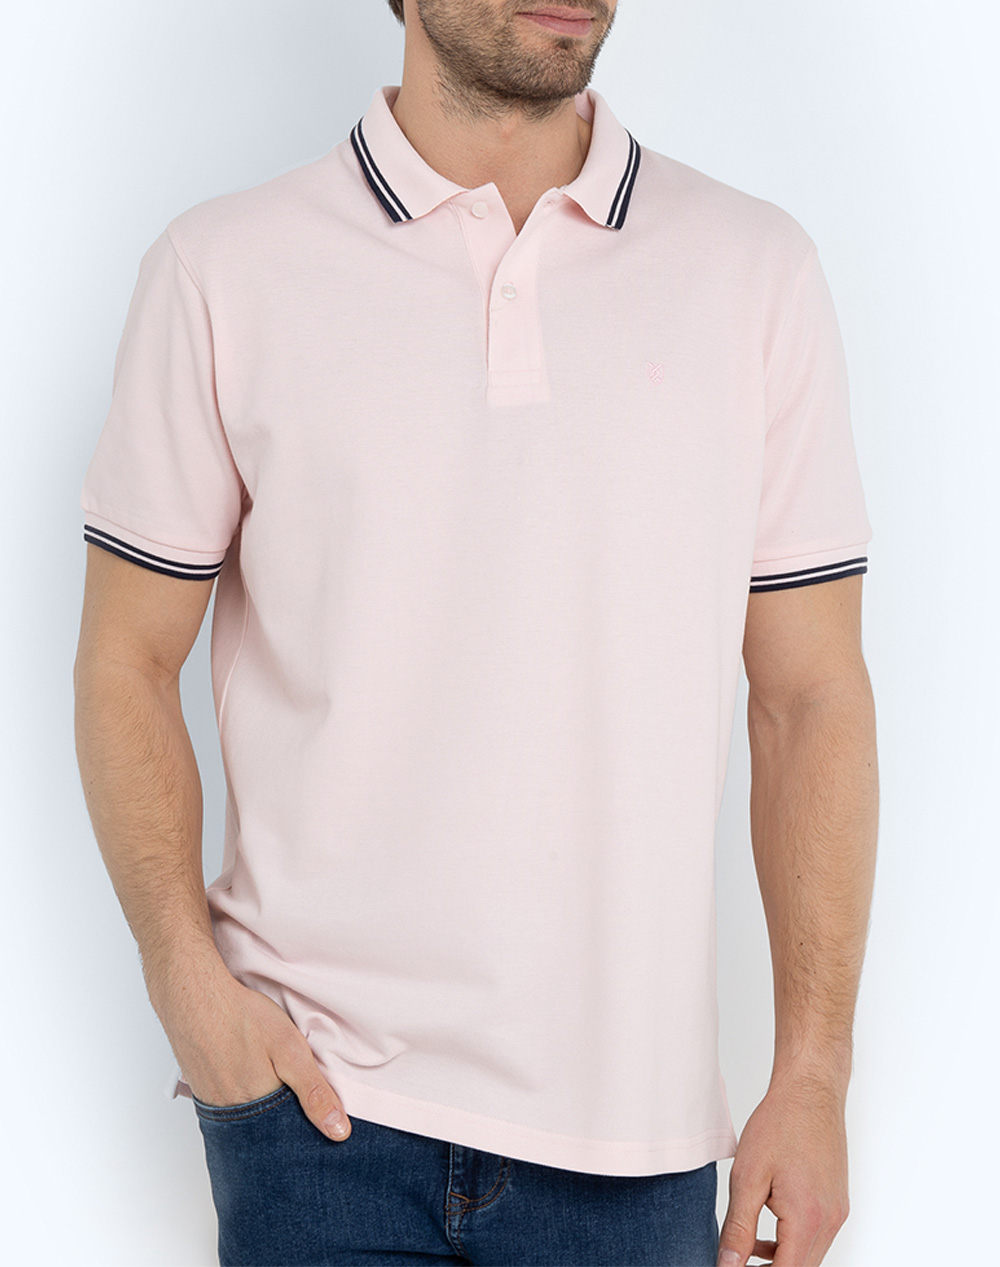 THE BOSTONIANS ΜΠΛΟΥΖΑ POLO PIQUE TWIN TIPPED REGULAR 3PS1271-PINK Pink 3820ABOST3410093_1893